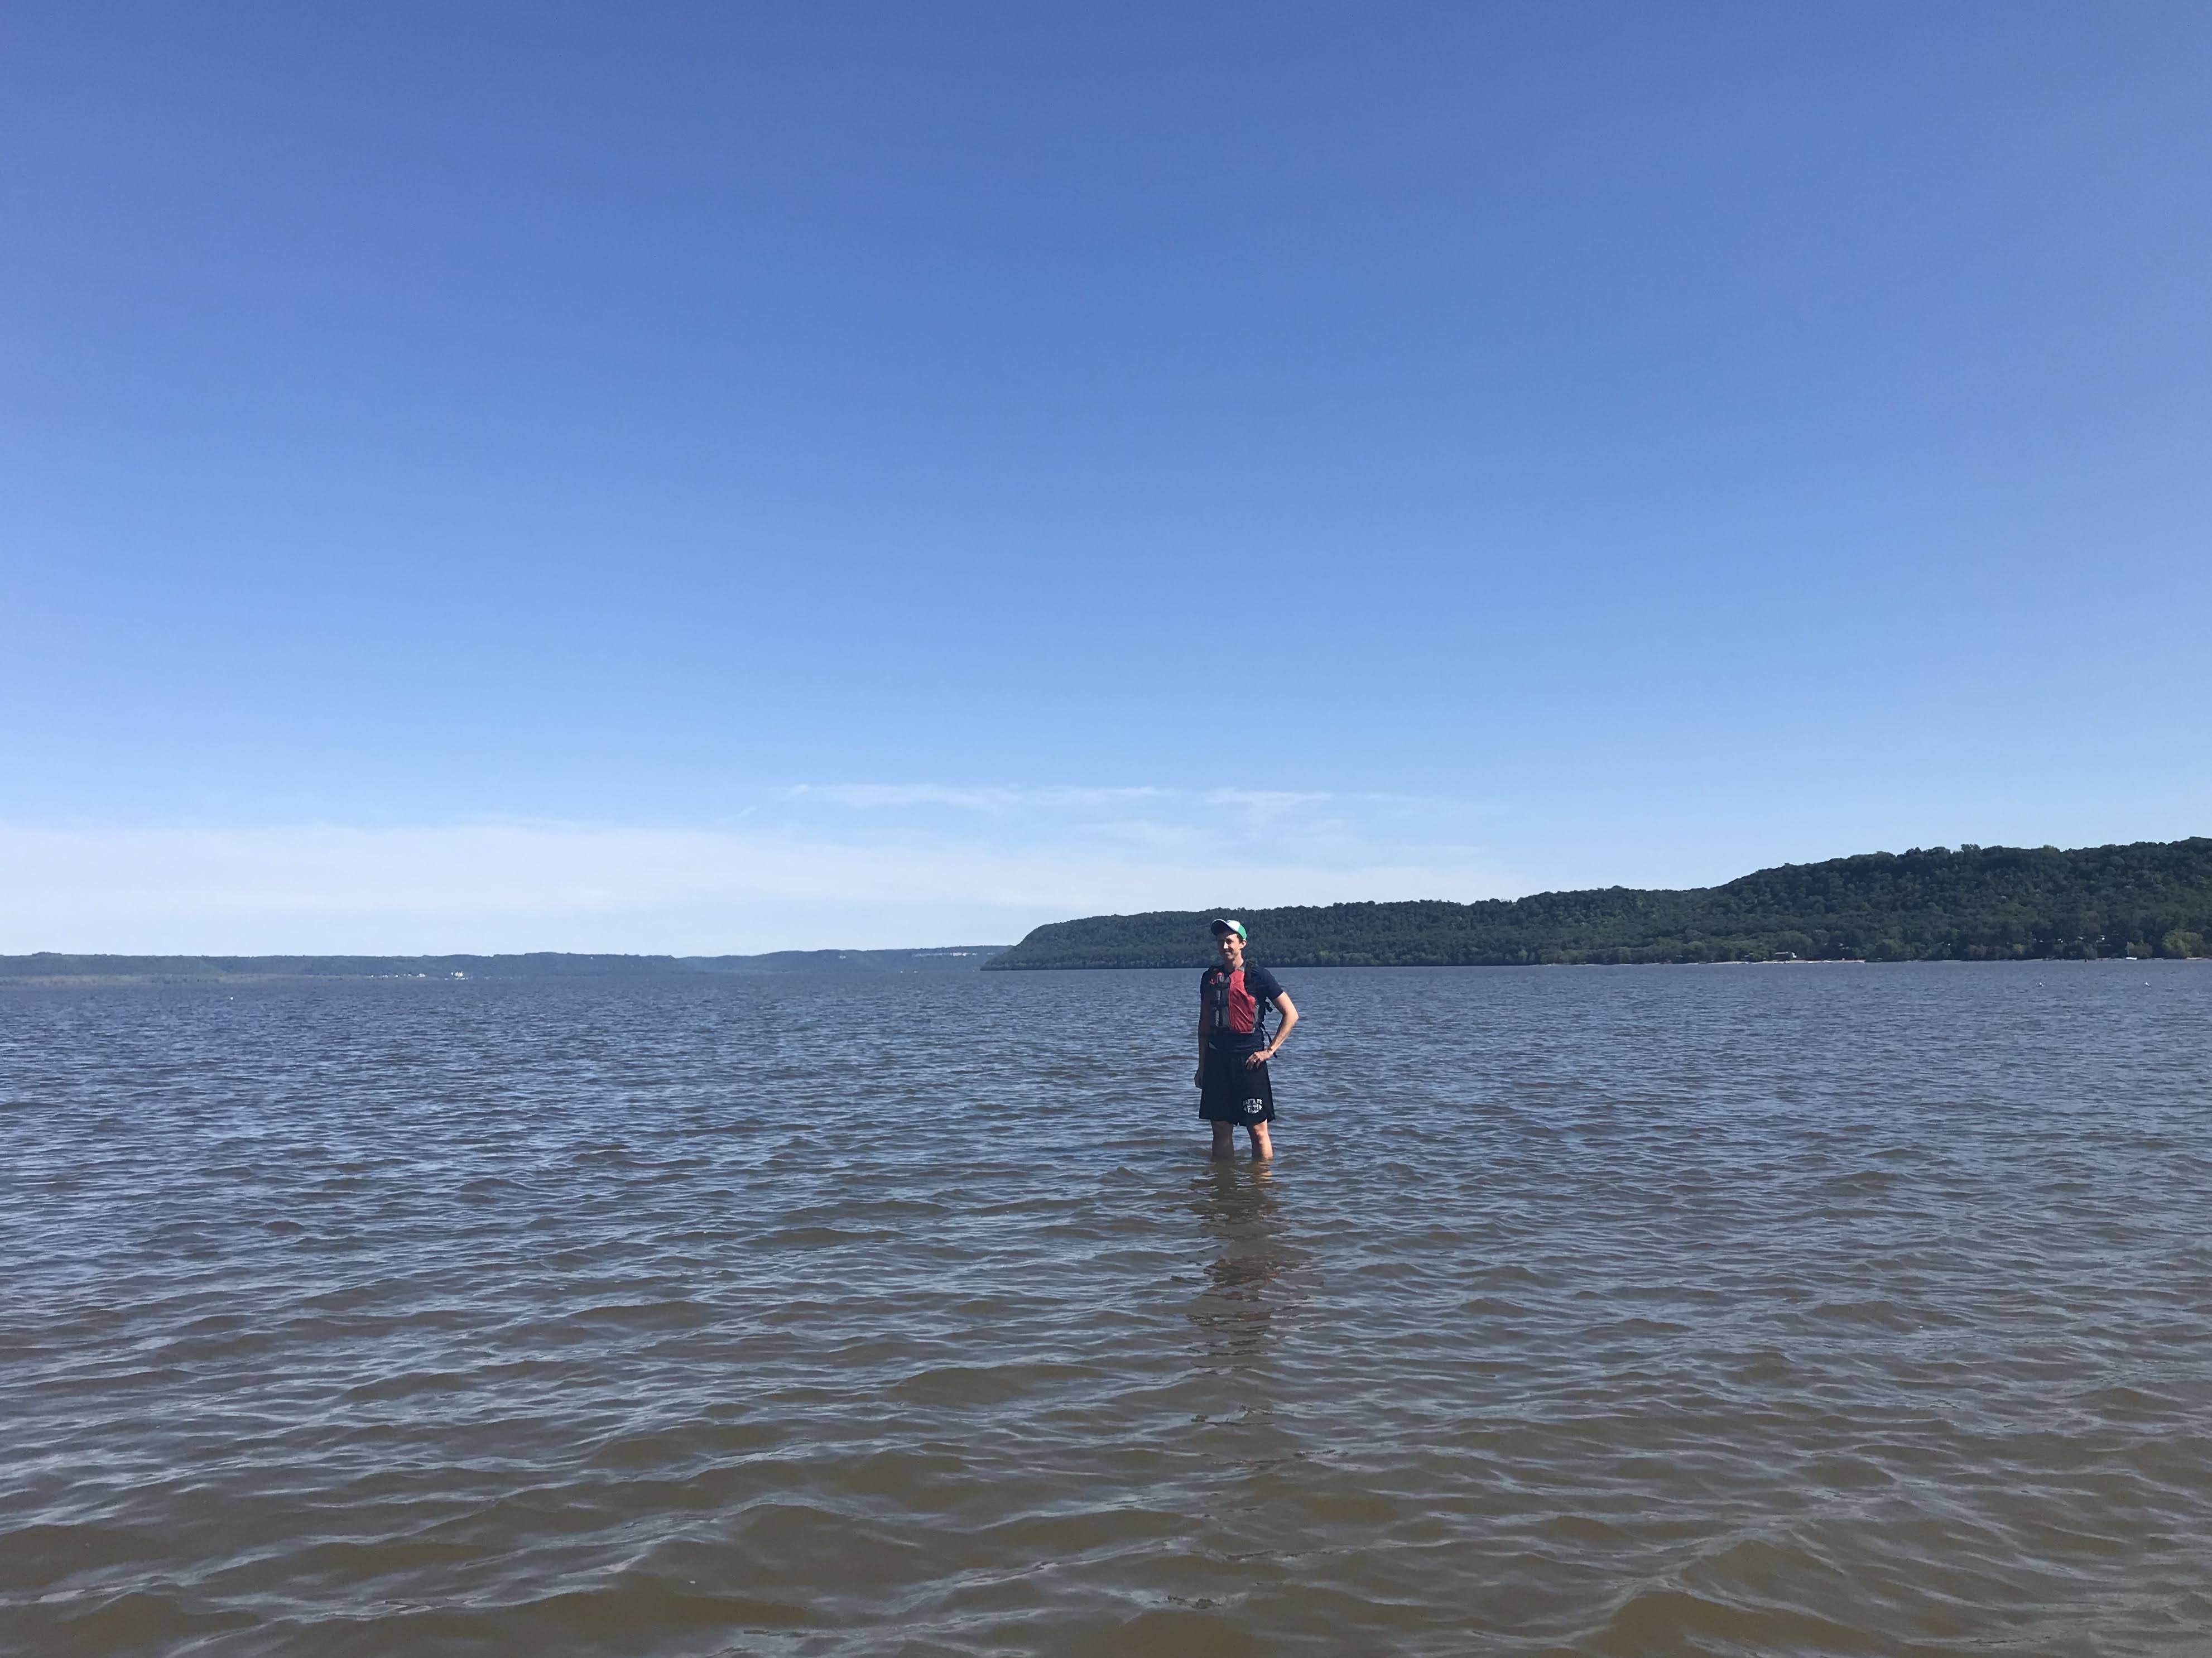 Standing at the head of Lake Pepin on the Mississippi River. Photo Kenz Becco.